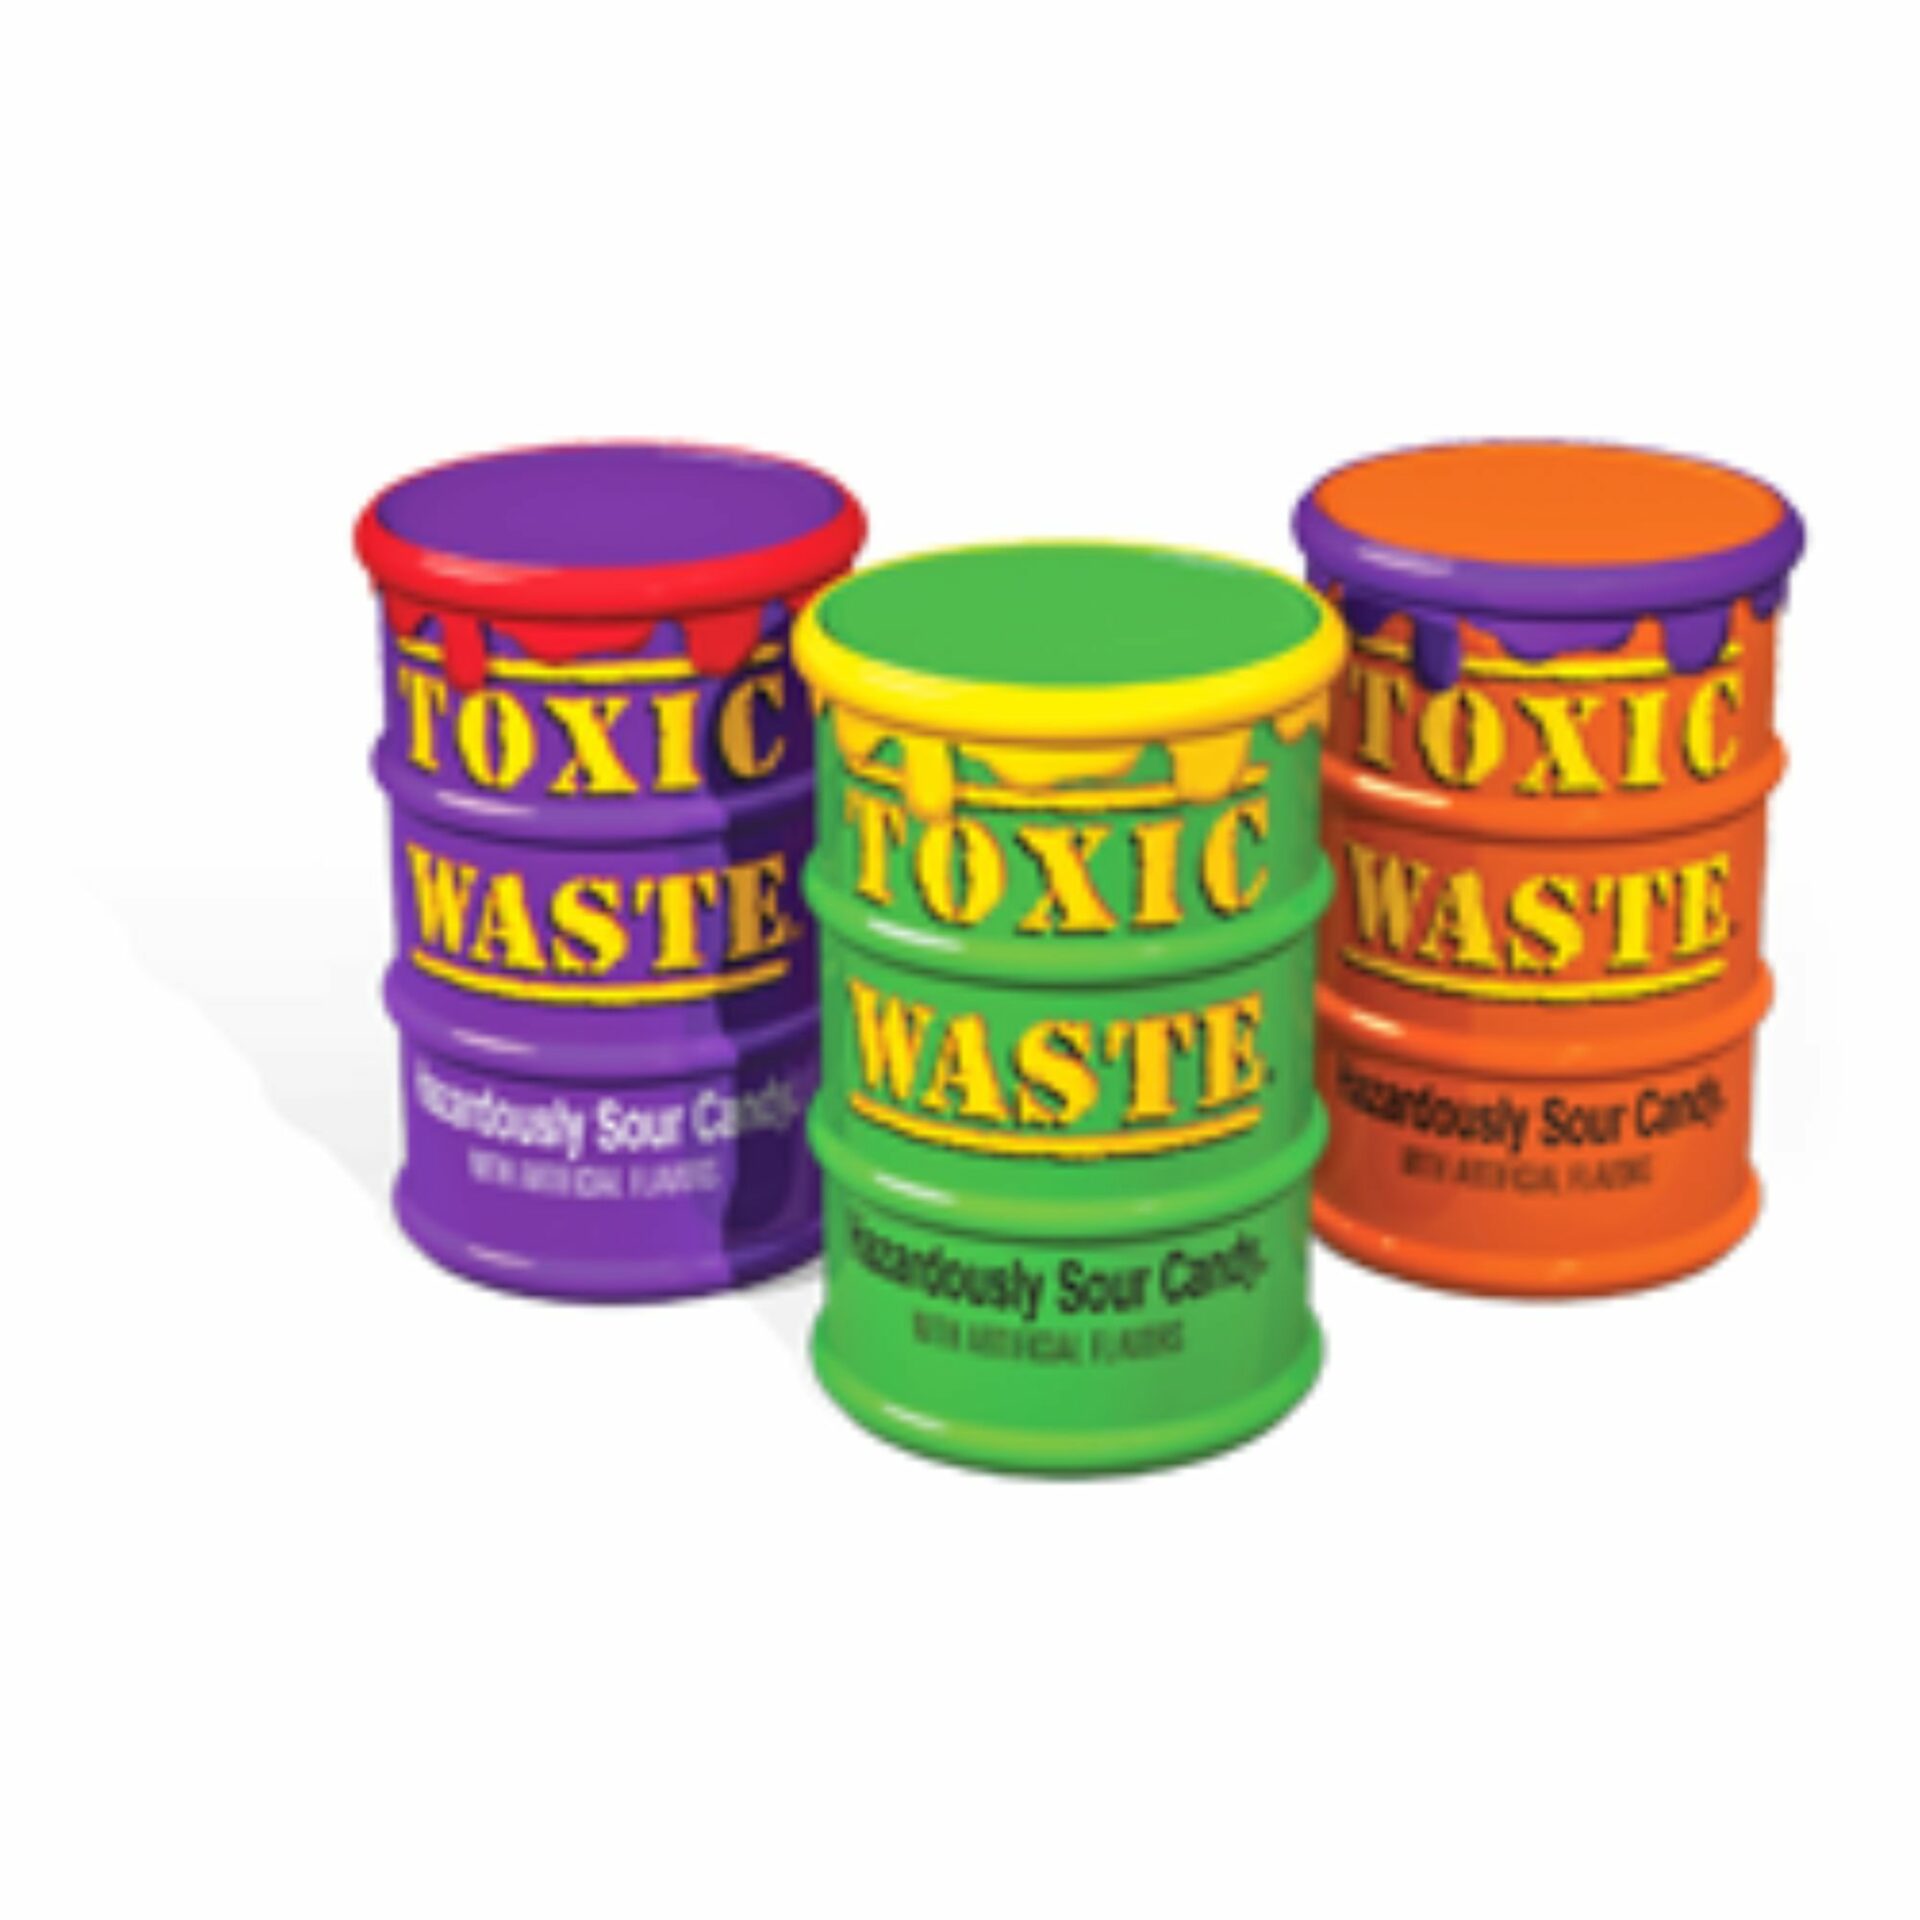 4x Toxic Waste Assorted Green/Red/Purple/Yellow Drum Sour Candy Sweets